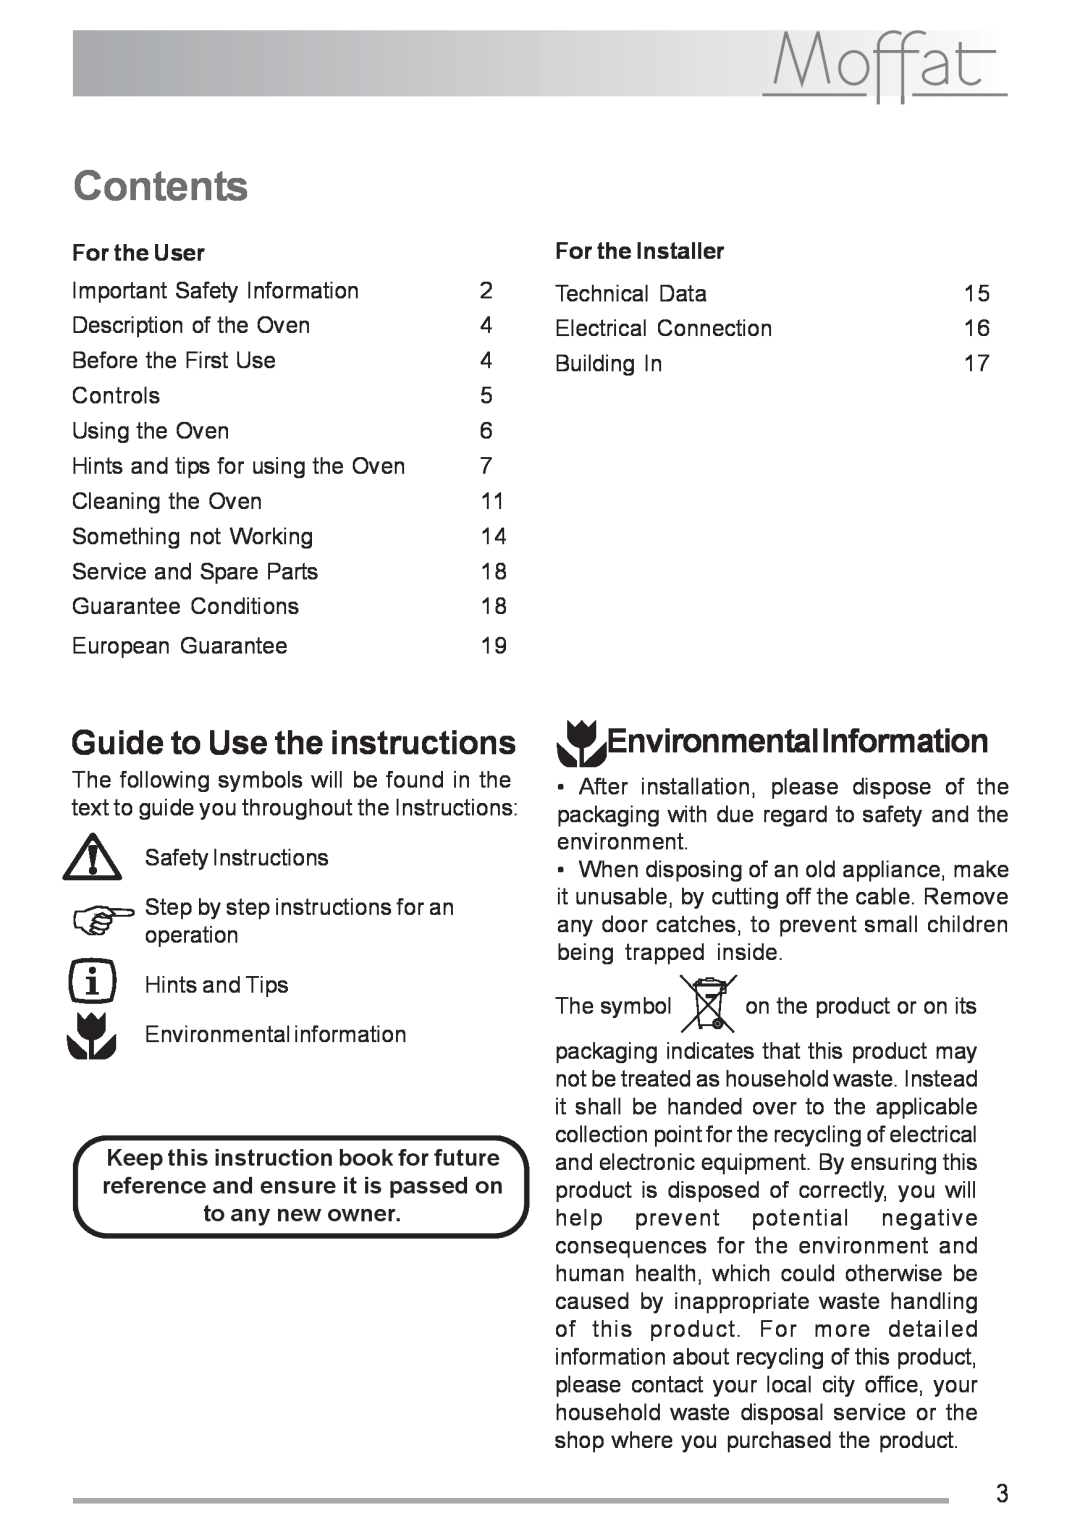 Moffat MSF 611 manual Contents, Guide to Use the instructions, EnvironmentalInformation, For the User, For the Installer 